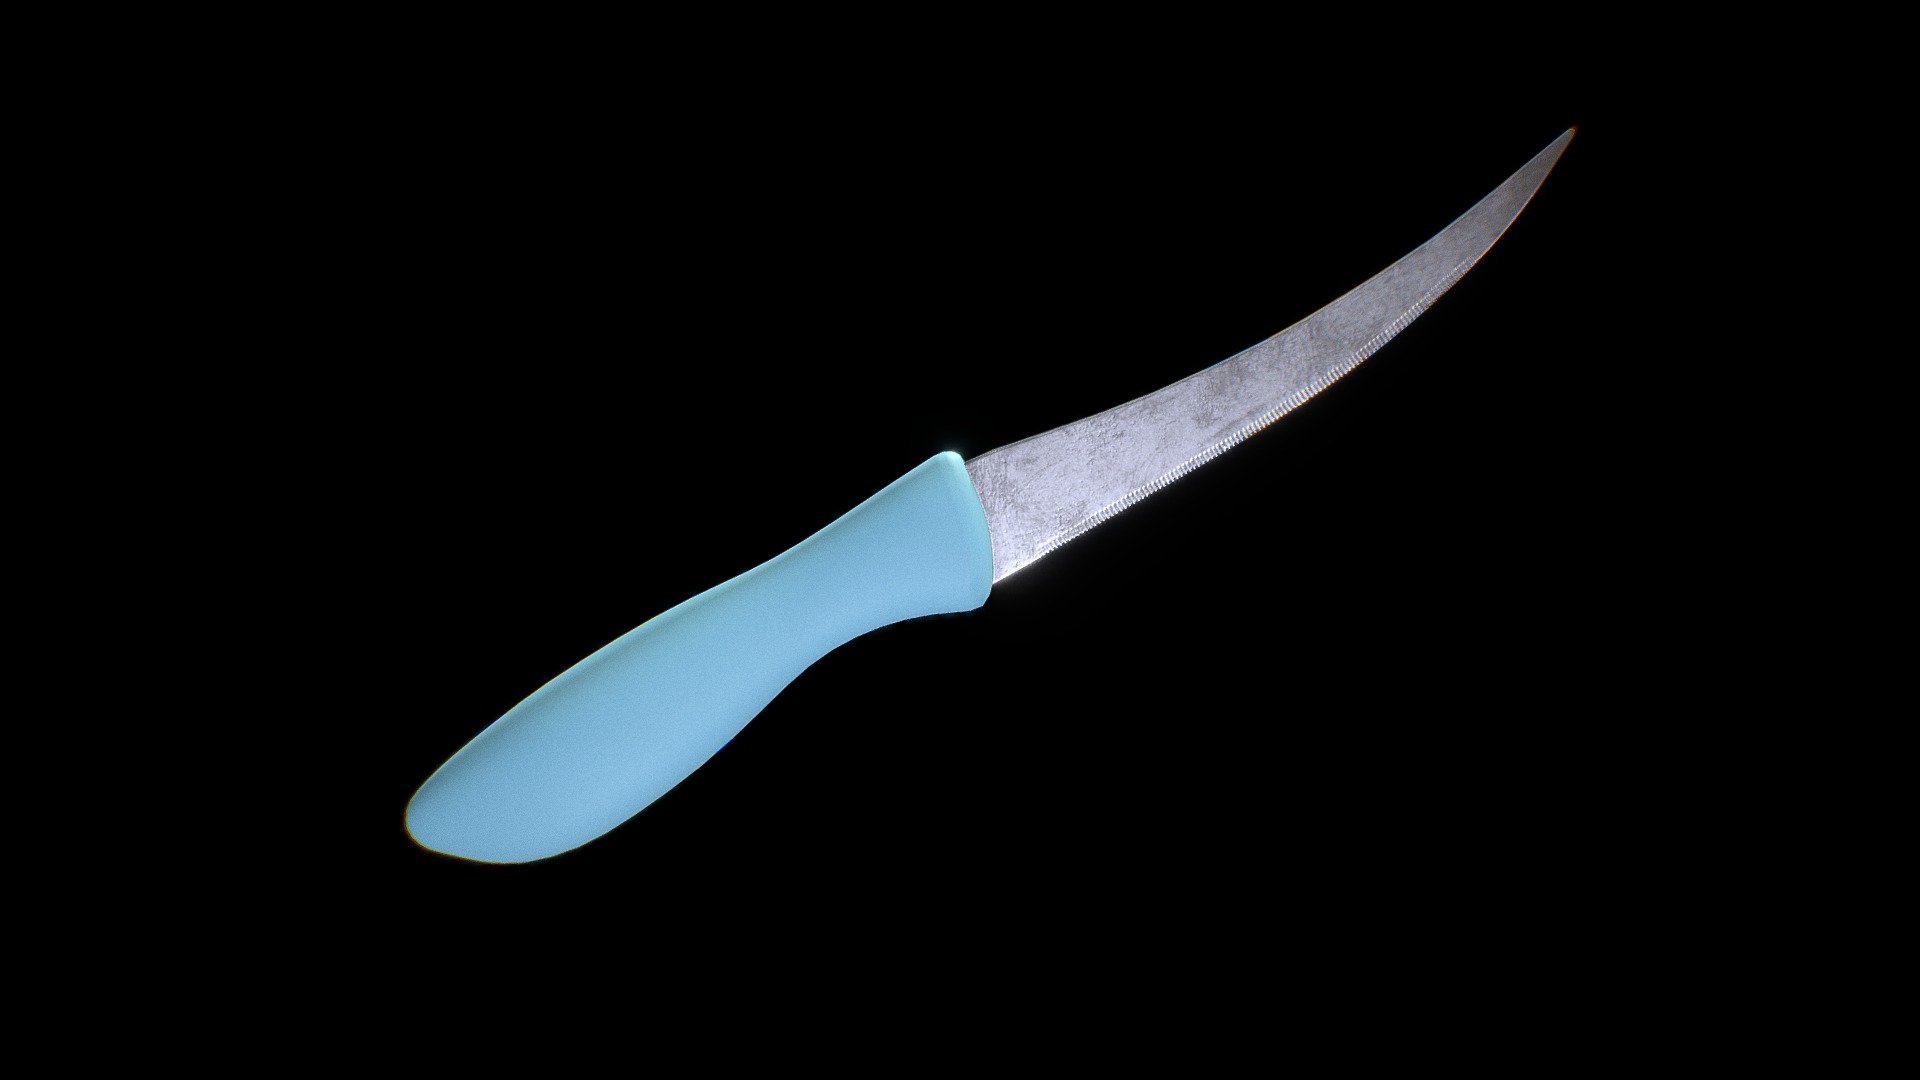 Kitchen model of a knife for cutting fruits and vegetables. The model was created in latest version of Blender and textured in Substance Painter.

4096 x 4096 resolution of textures.

BaseColor Normal Metalness Ambient Occlusion Roughness Textures - PNG - Knife blue grip - Buy Royalty Free 3D model by 3dJNCTN (@surajrai18.sr) 3d model